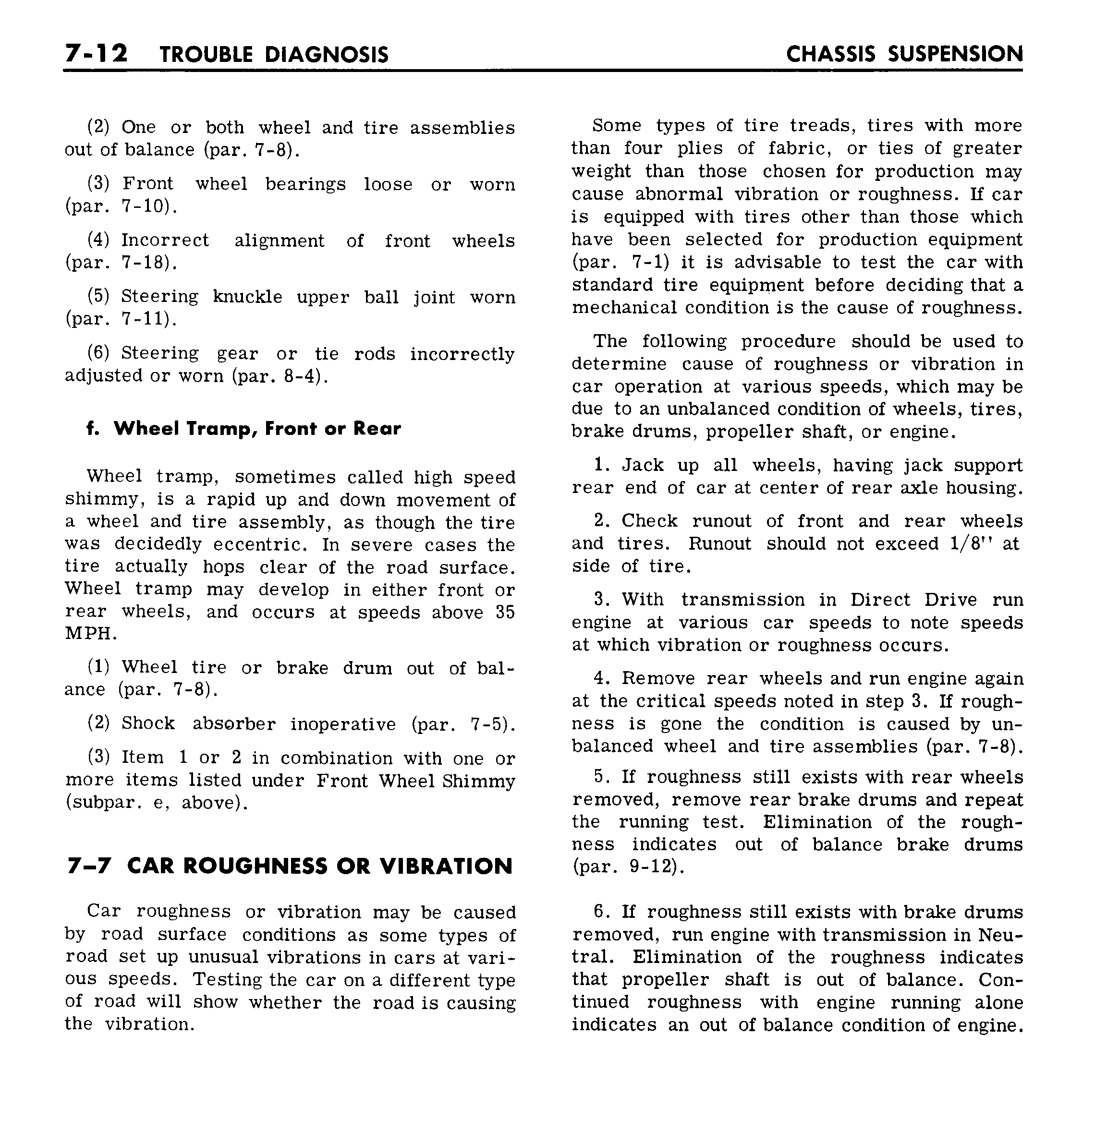 n_07 1961 Buick Shop Manual - Chassis Suspension-012-012.jpg